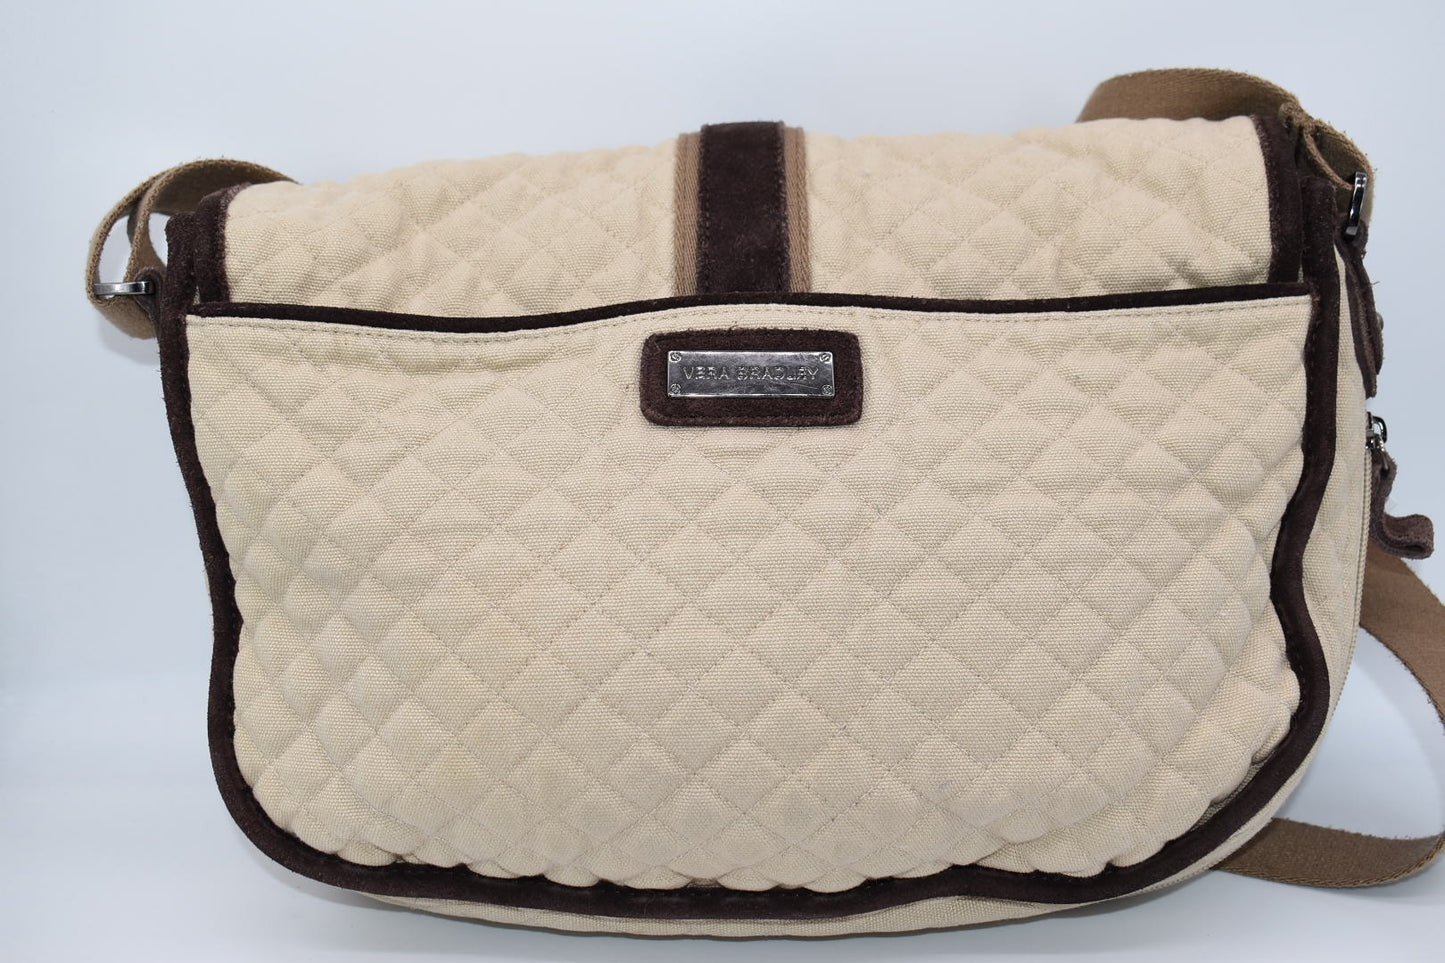 Vera Bradley Side Saddle Expandable Crossbody Bag in Beige with Suede Trim